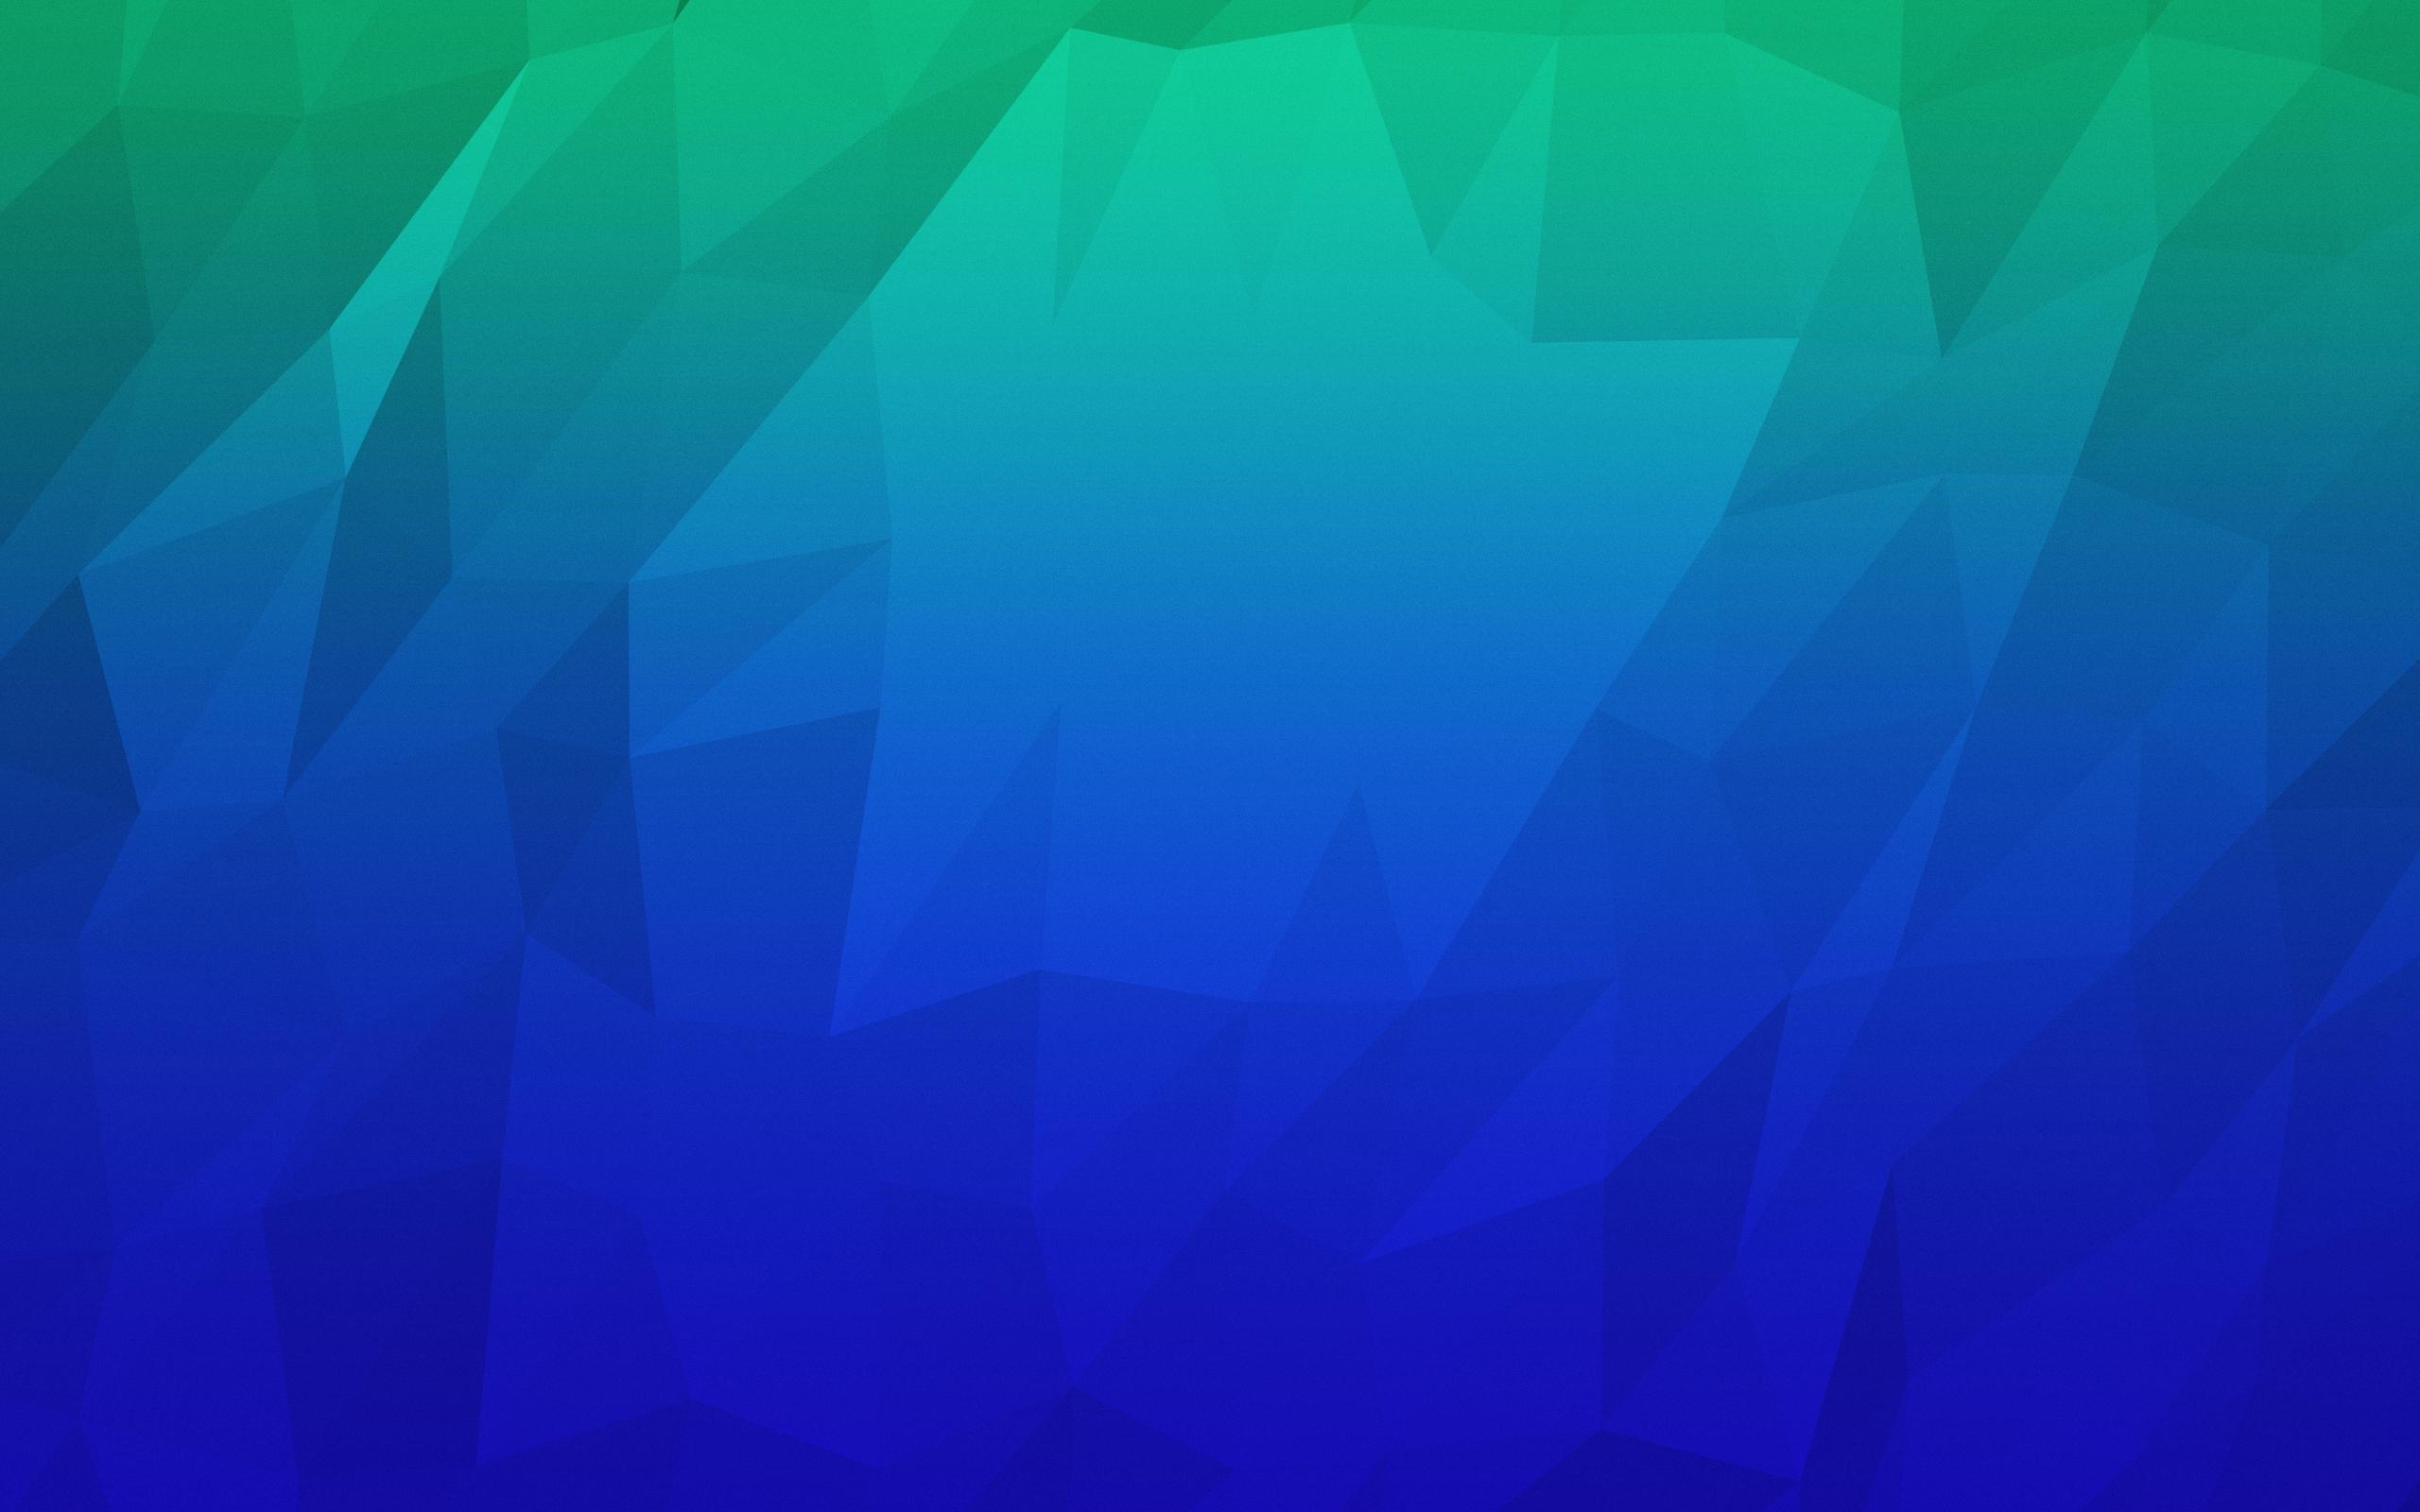  Blue Less Green Color Abstract Surface wallpaper Best HD Wallpapers